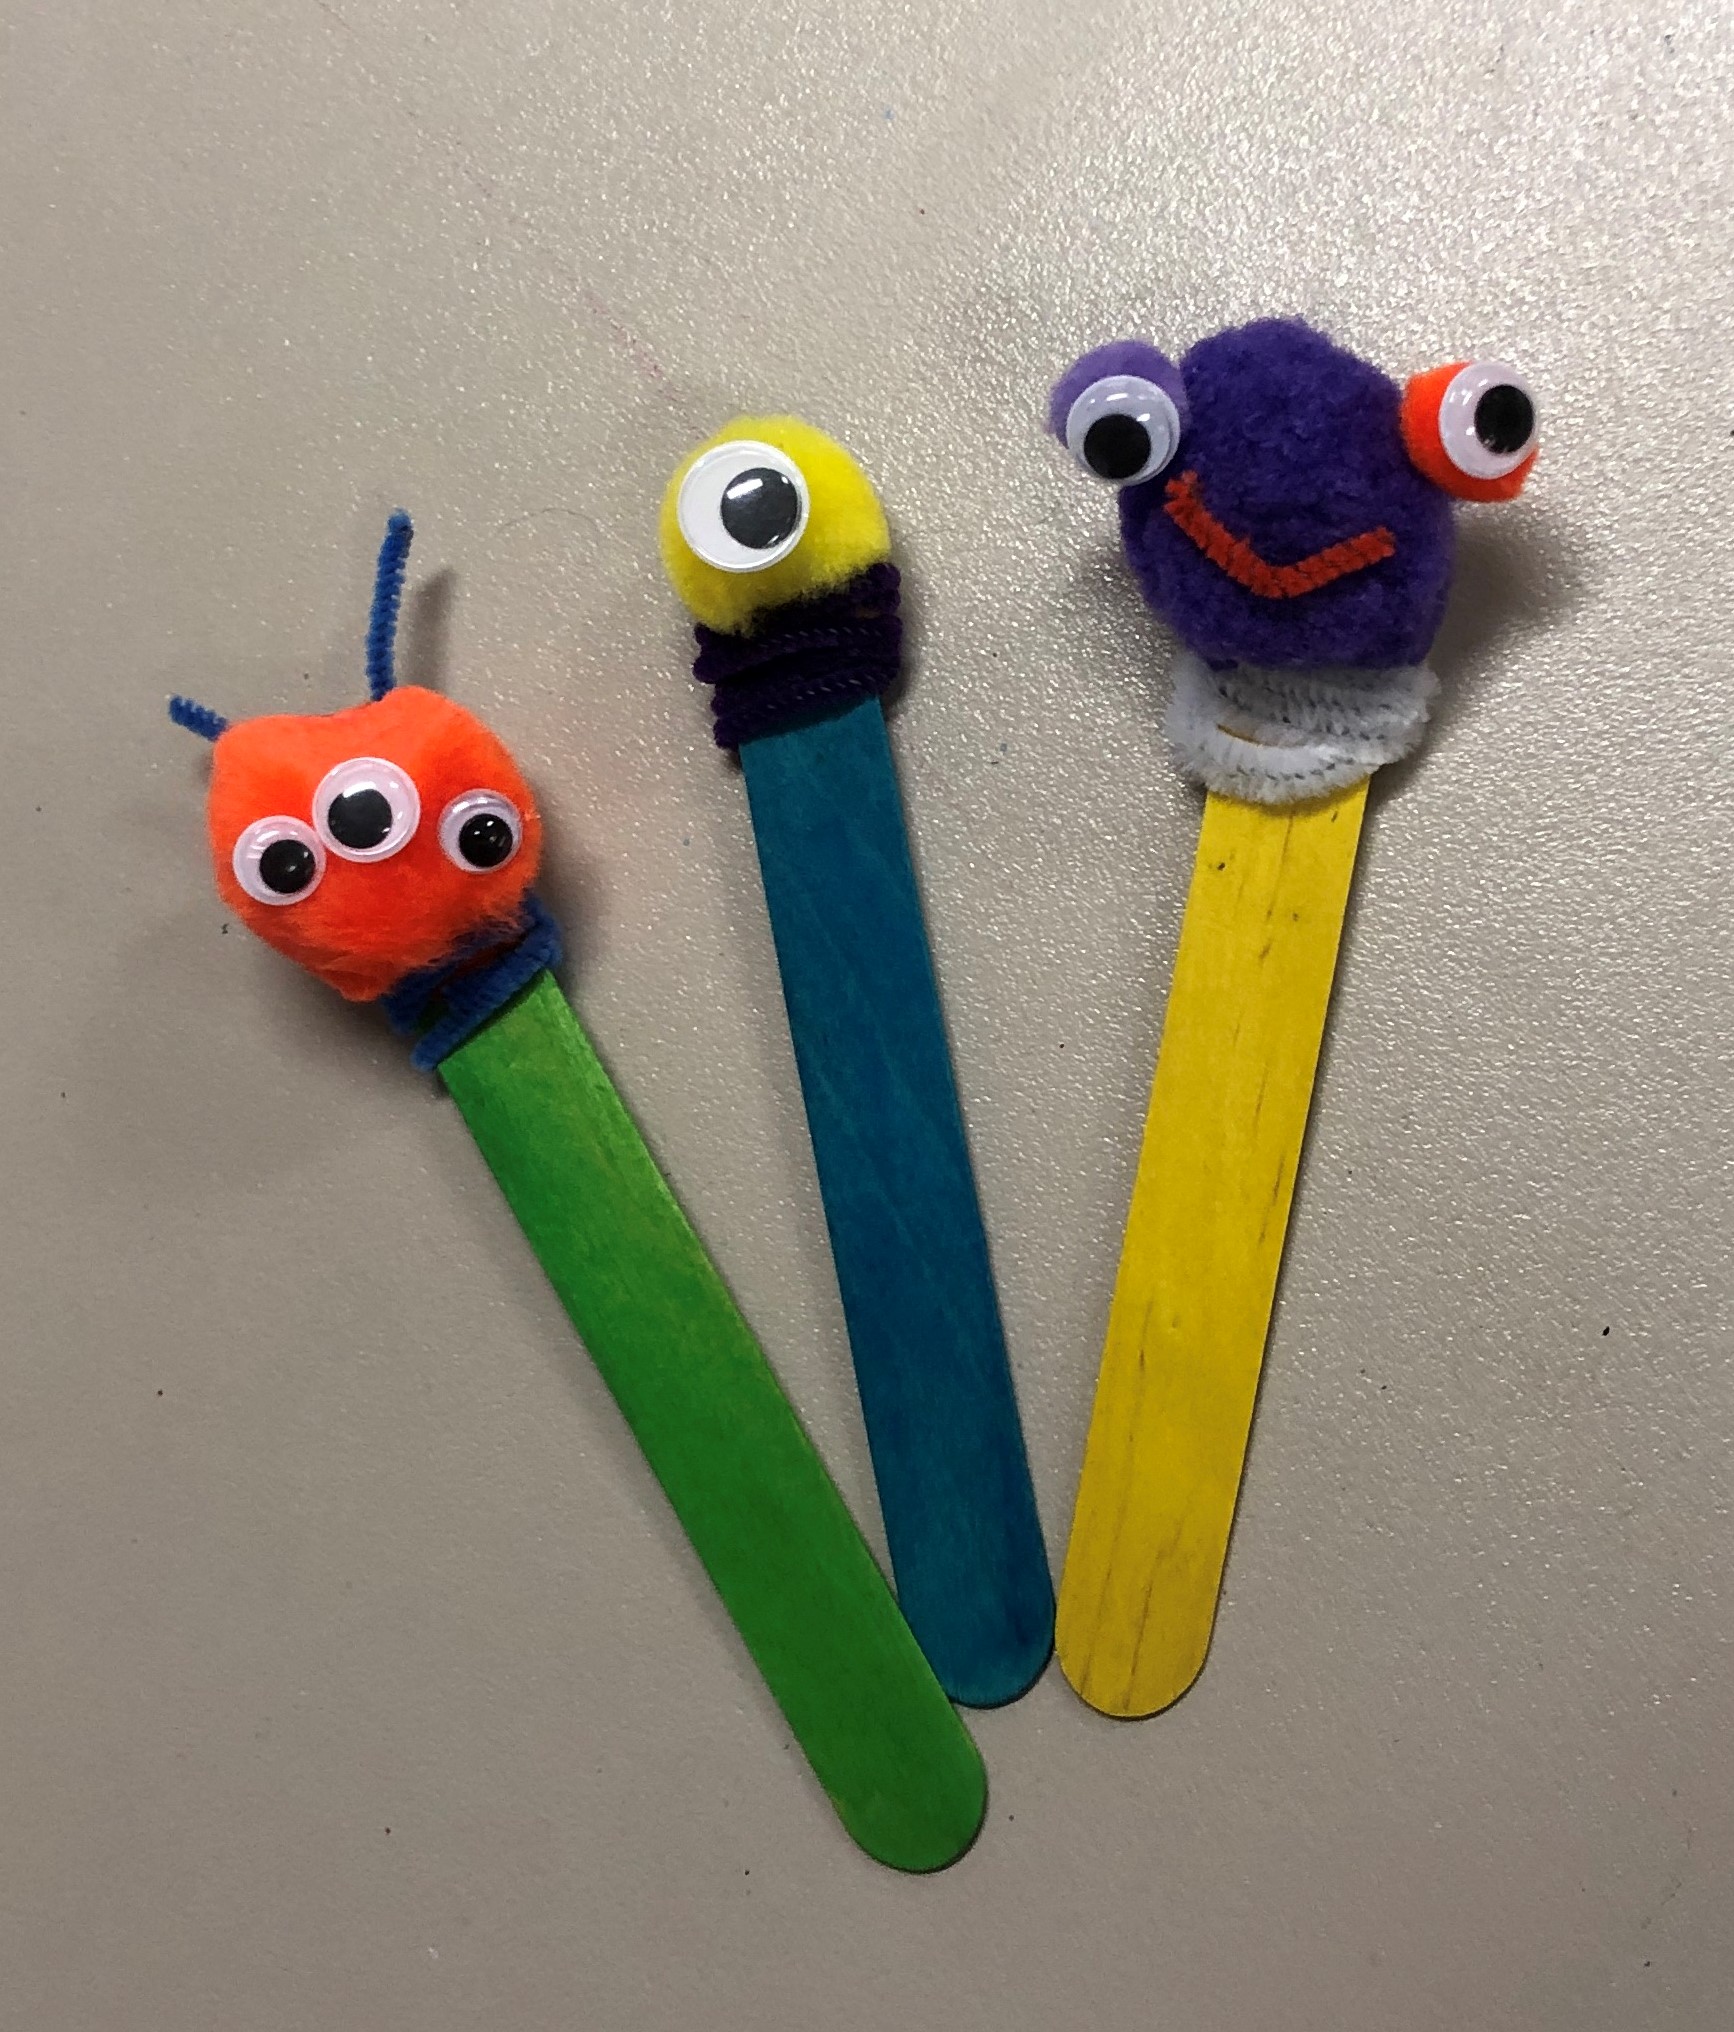 Popsicle sticks with pom-poms, googly eyes, and pipe cleaners